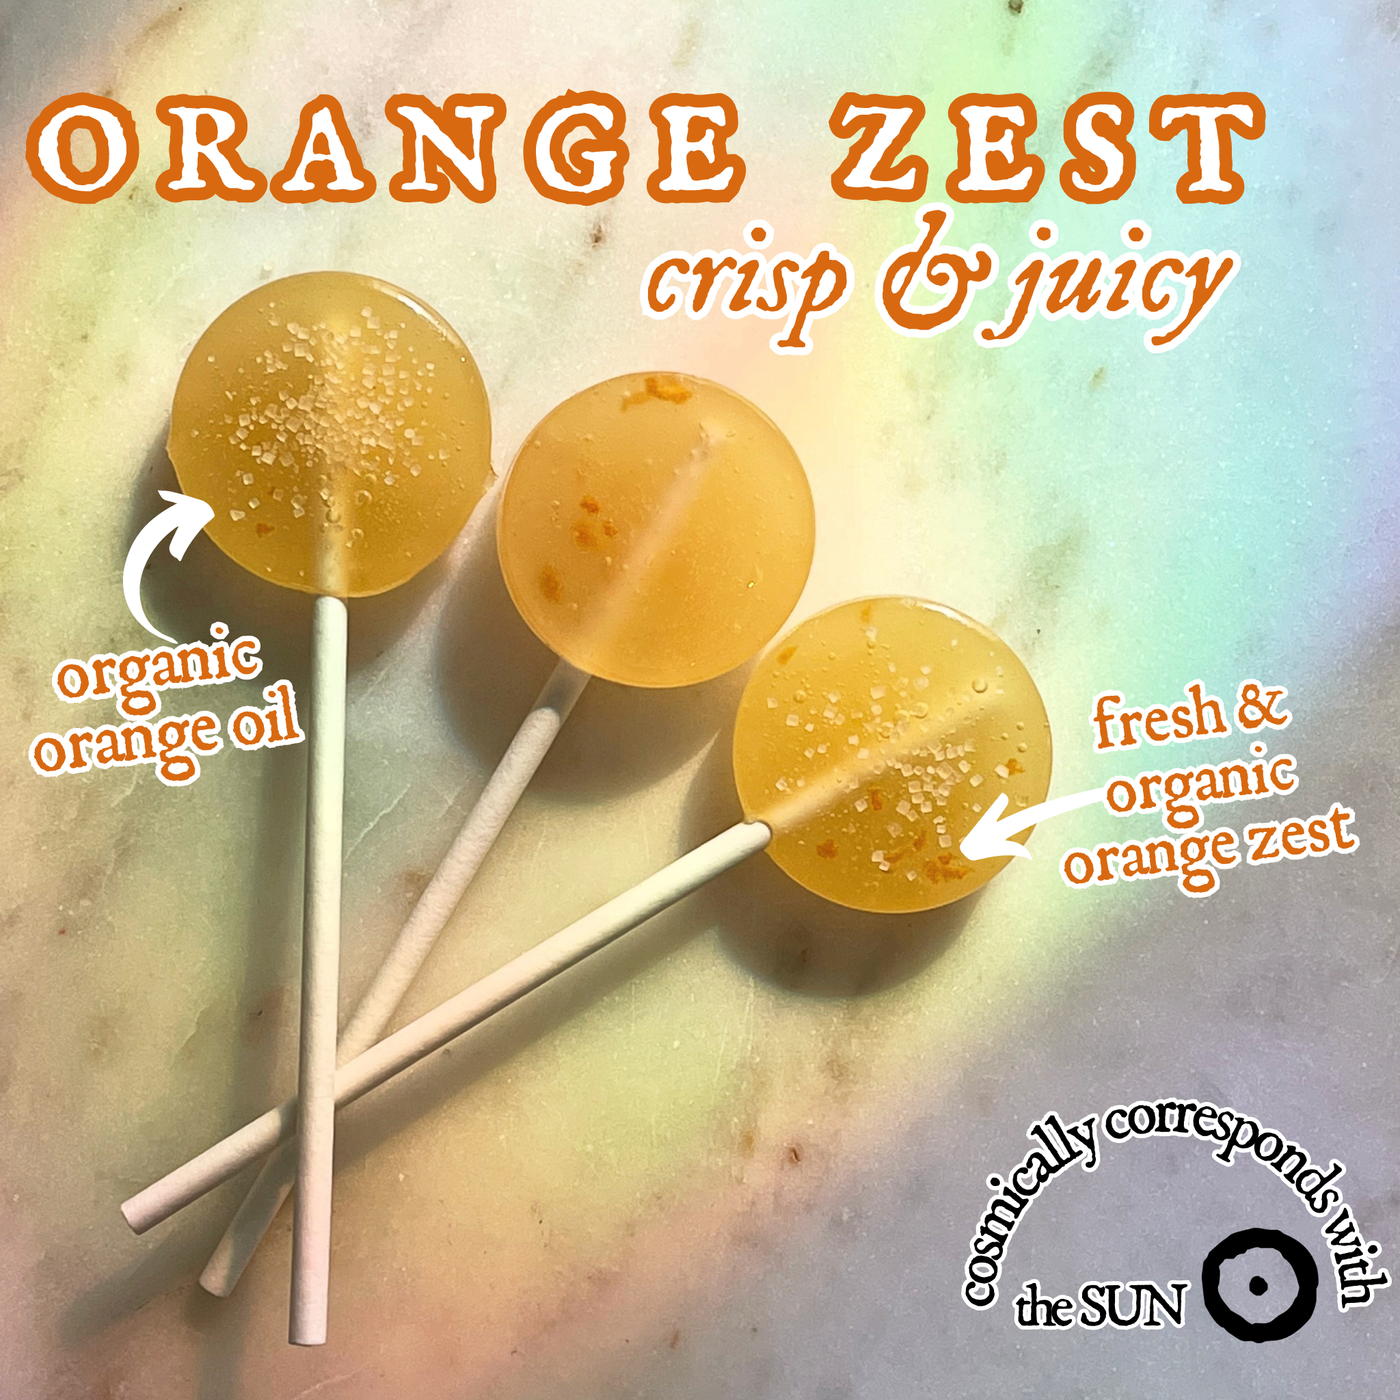 Plants & Planets Lollipops - Cosmic Candy Apothecary: Peaches & Cream